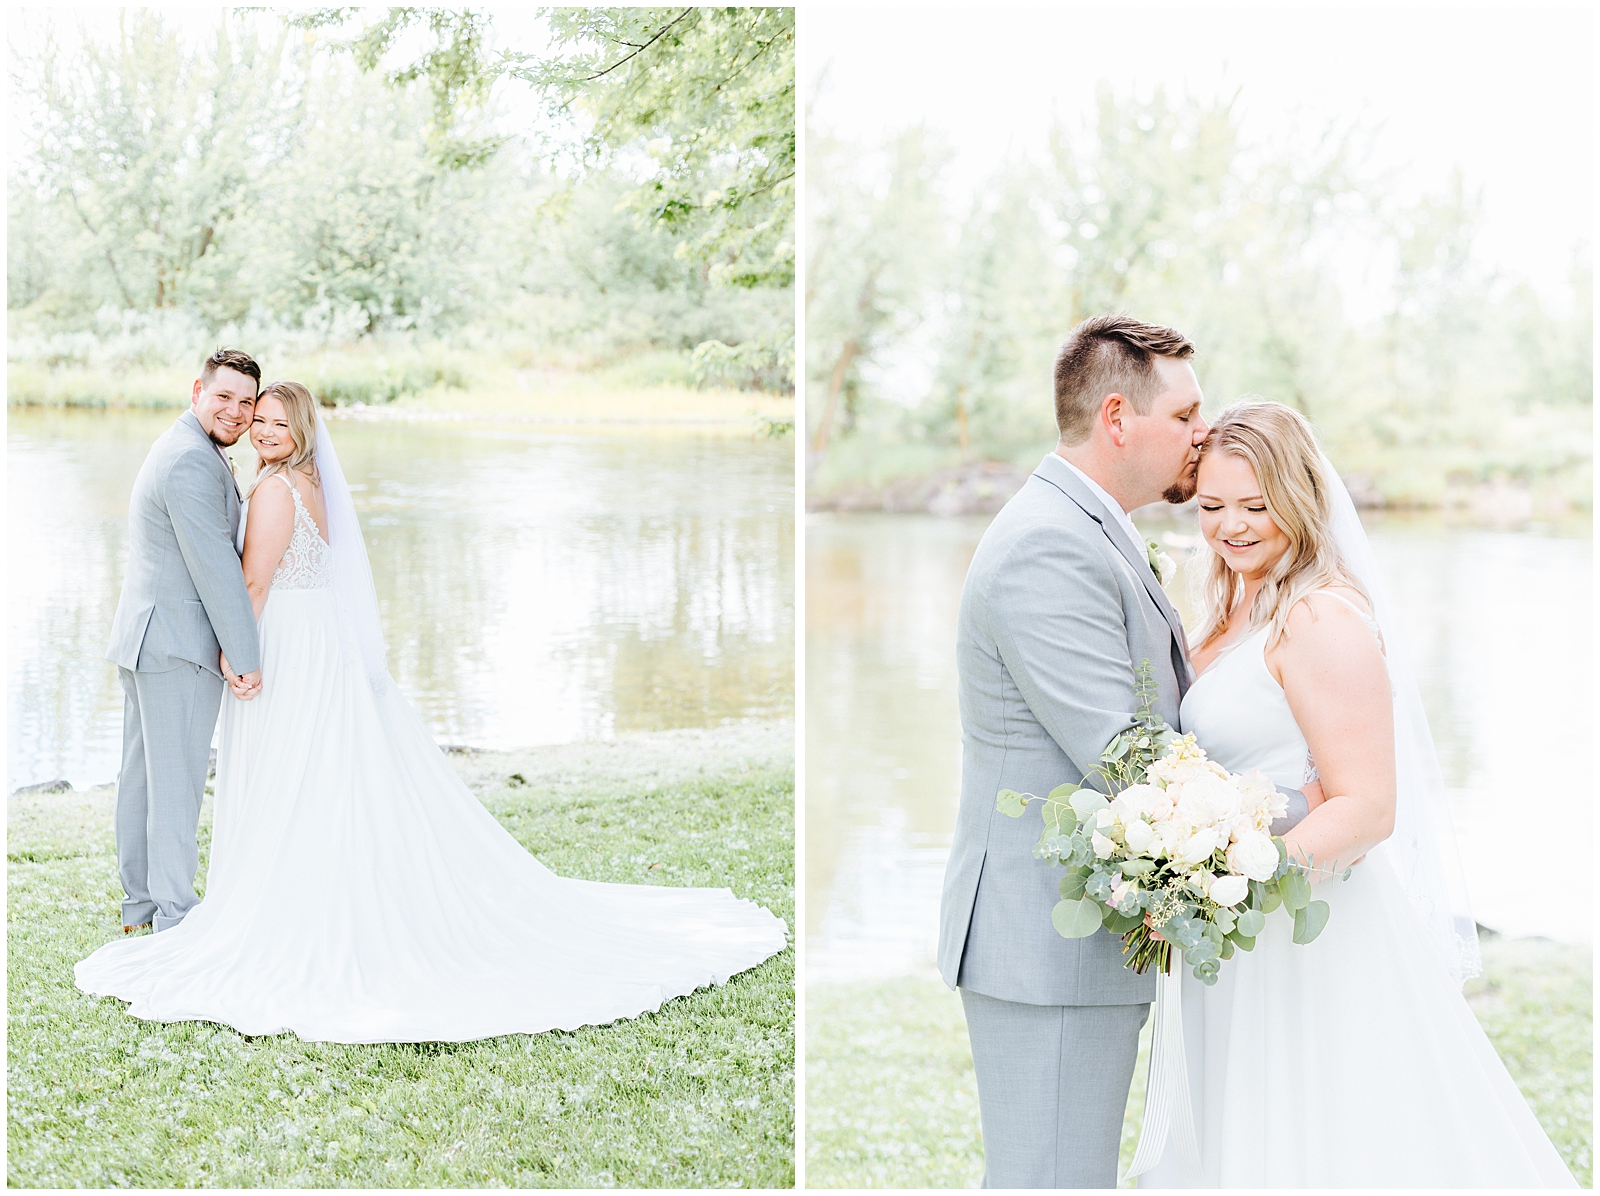 Classic Grey Suit and White florals in Bride and Groom Portraits at White Willow Estate Wedding